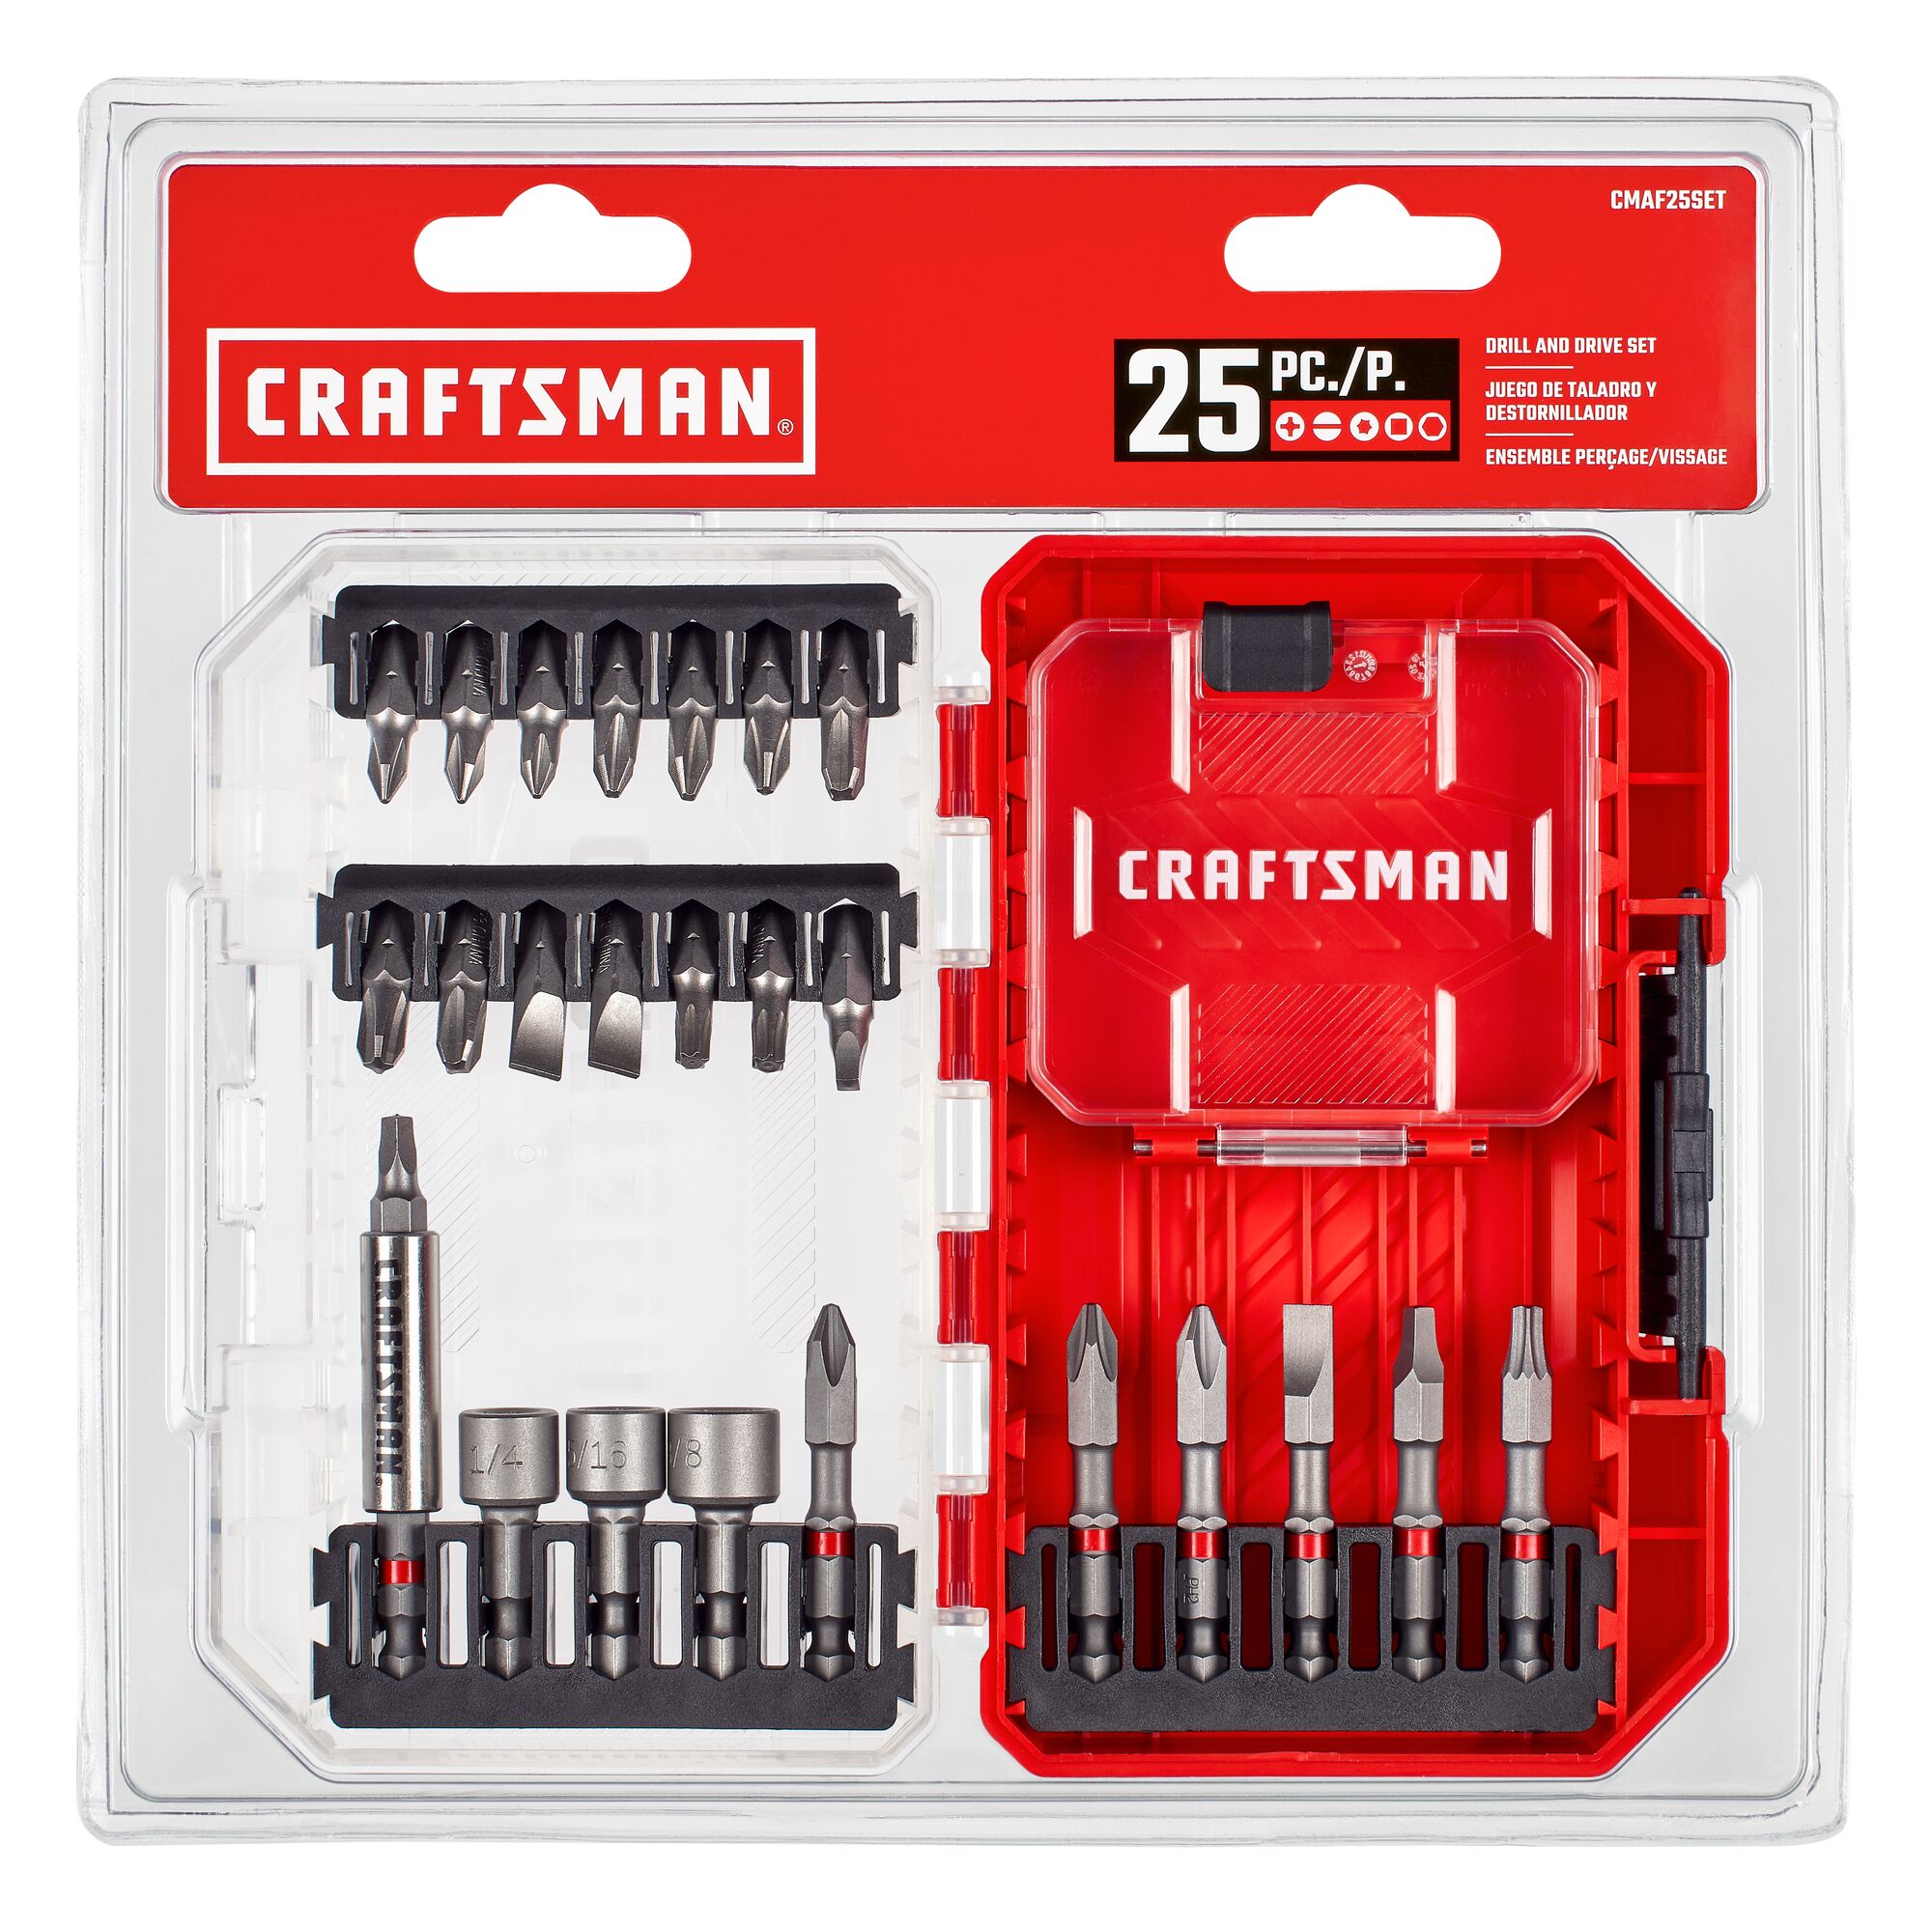 Screwdriver Bit Set Screwdriver 25 piece with case open in blister packaging.